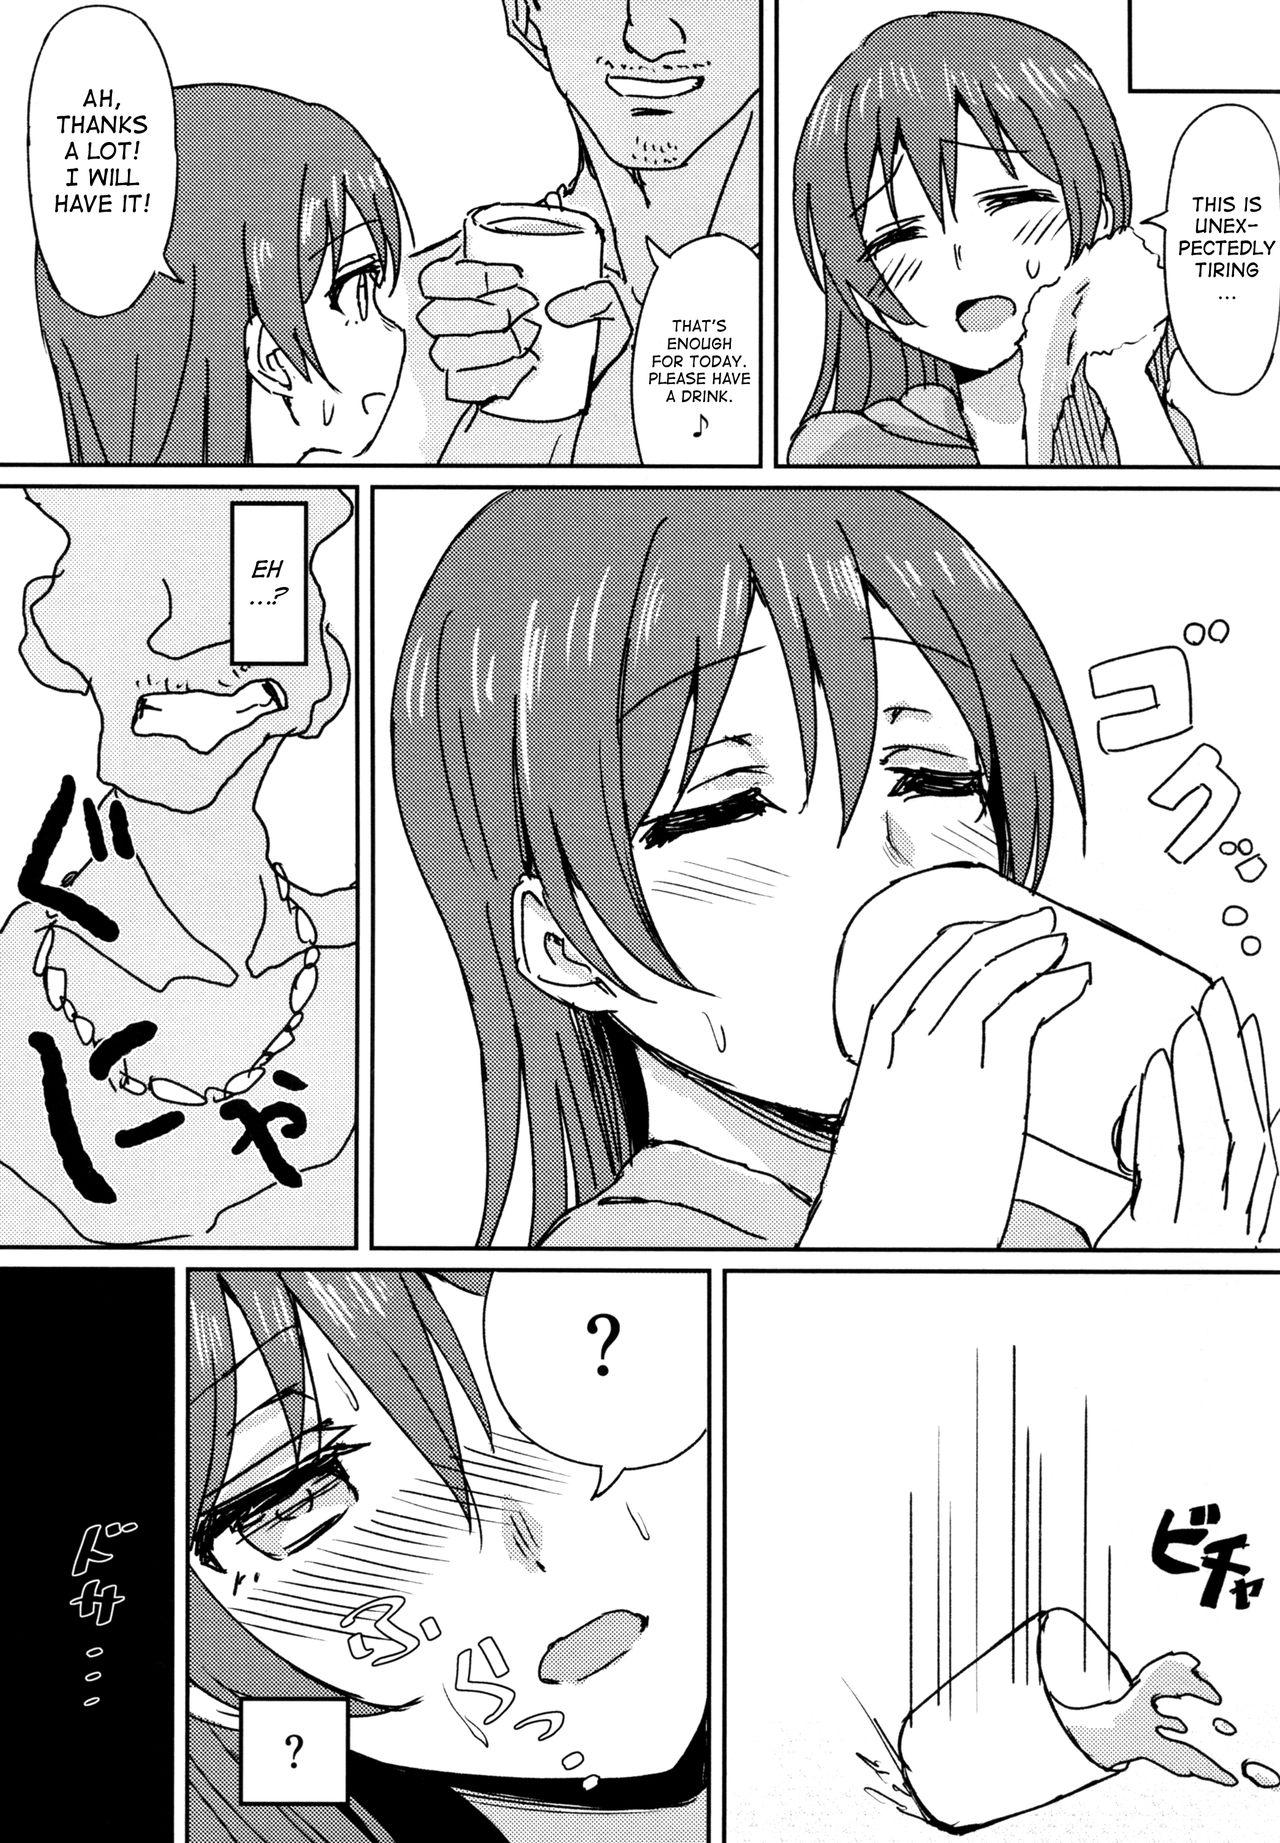 Kitchen Hah,Wrench This! - Love live Tugjob - Page 9